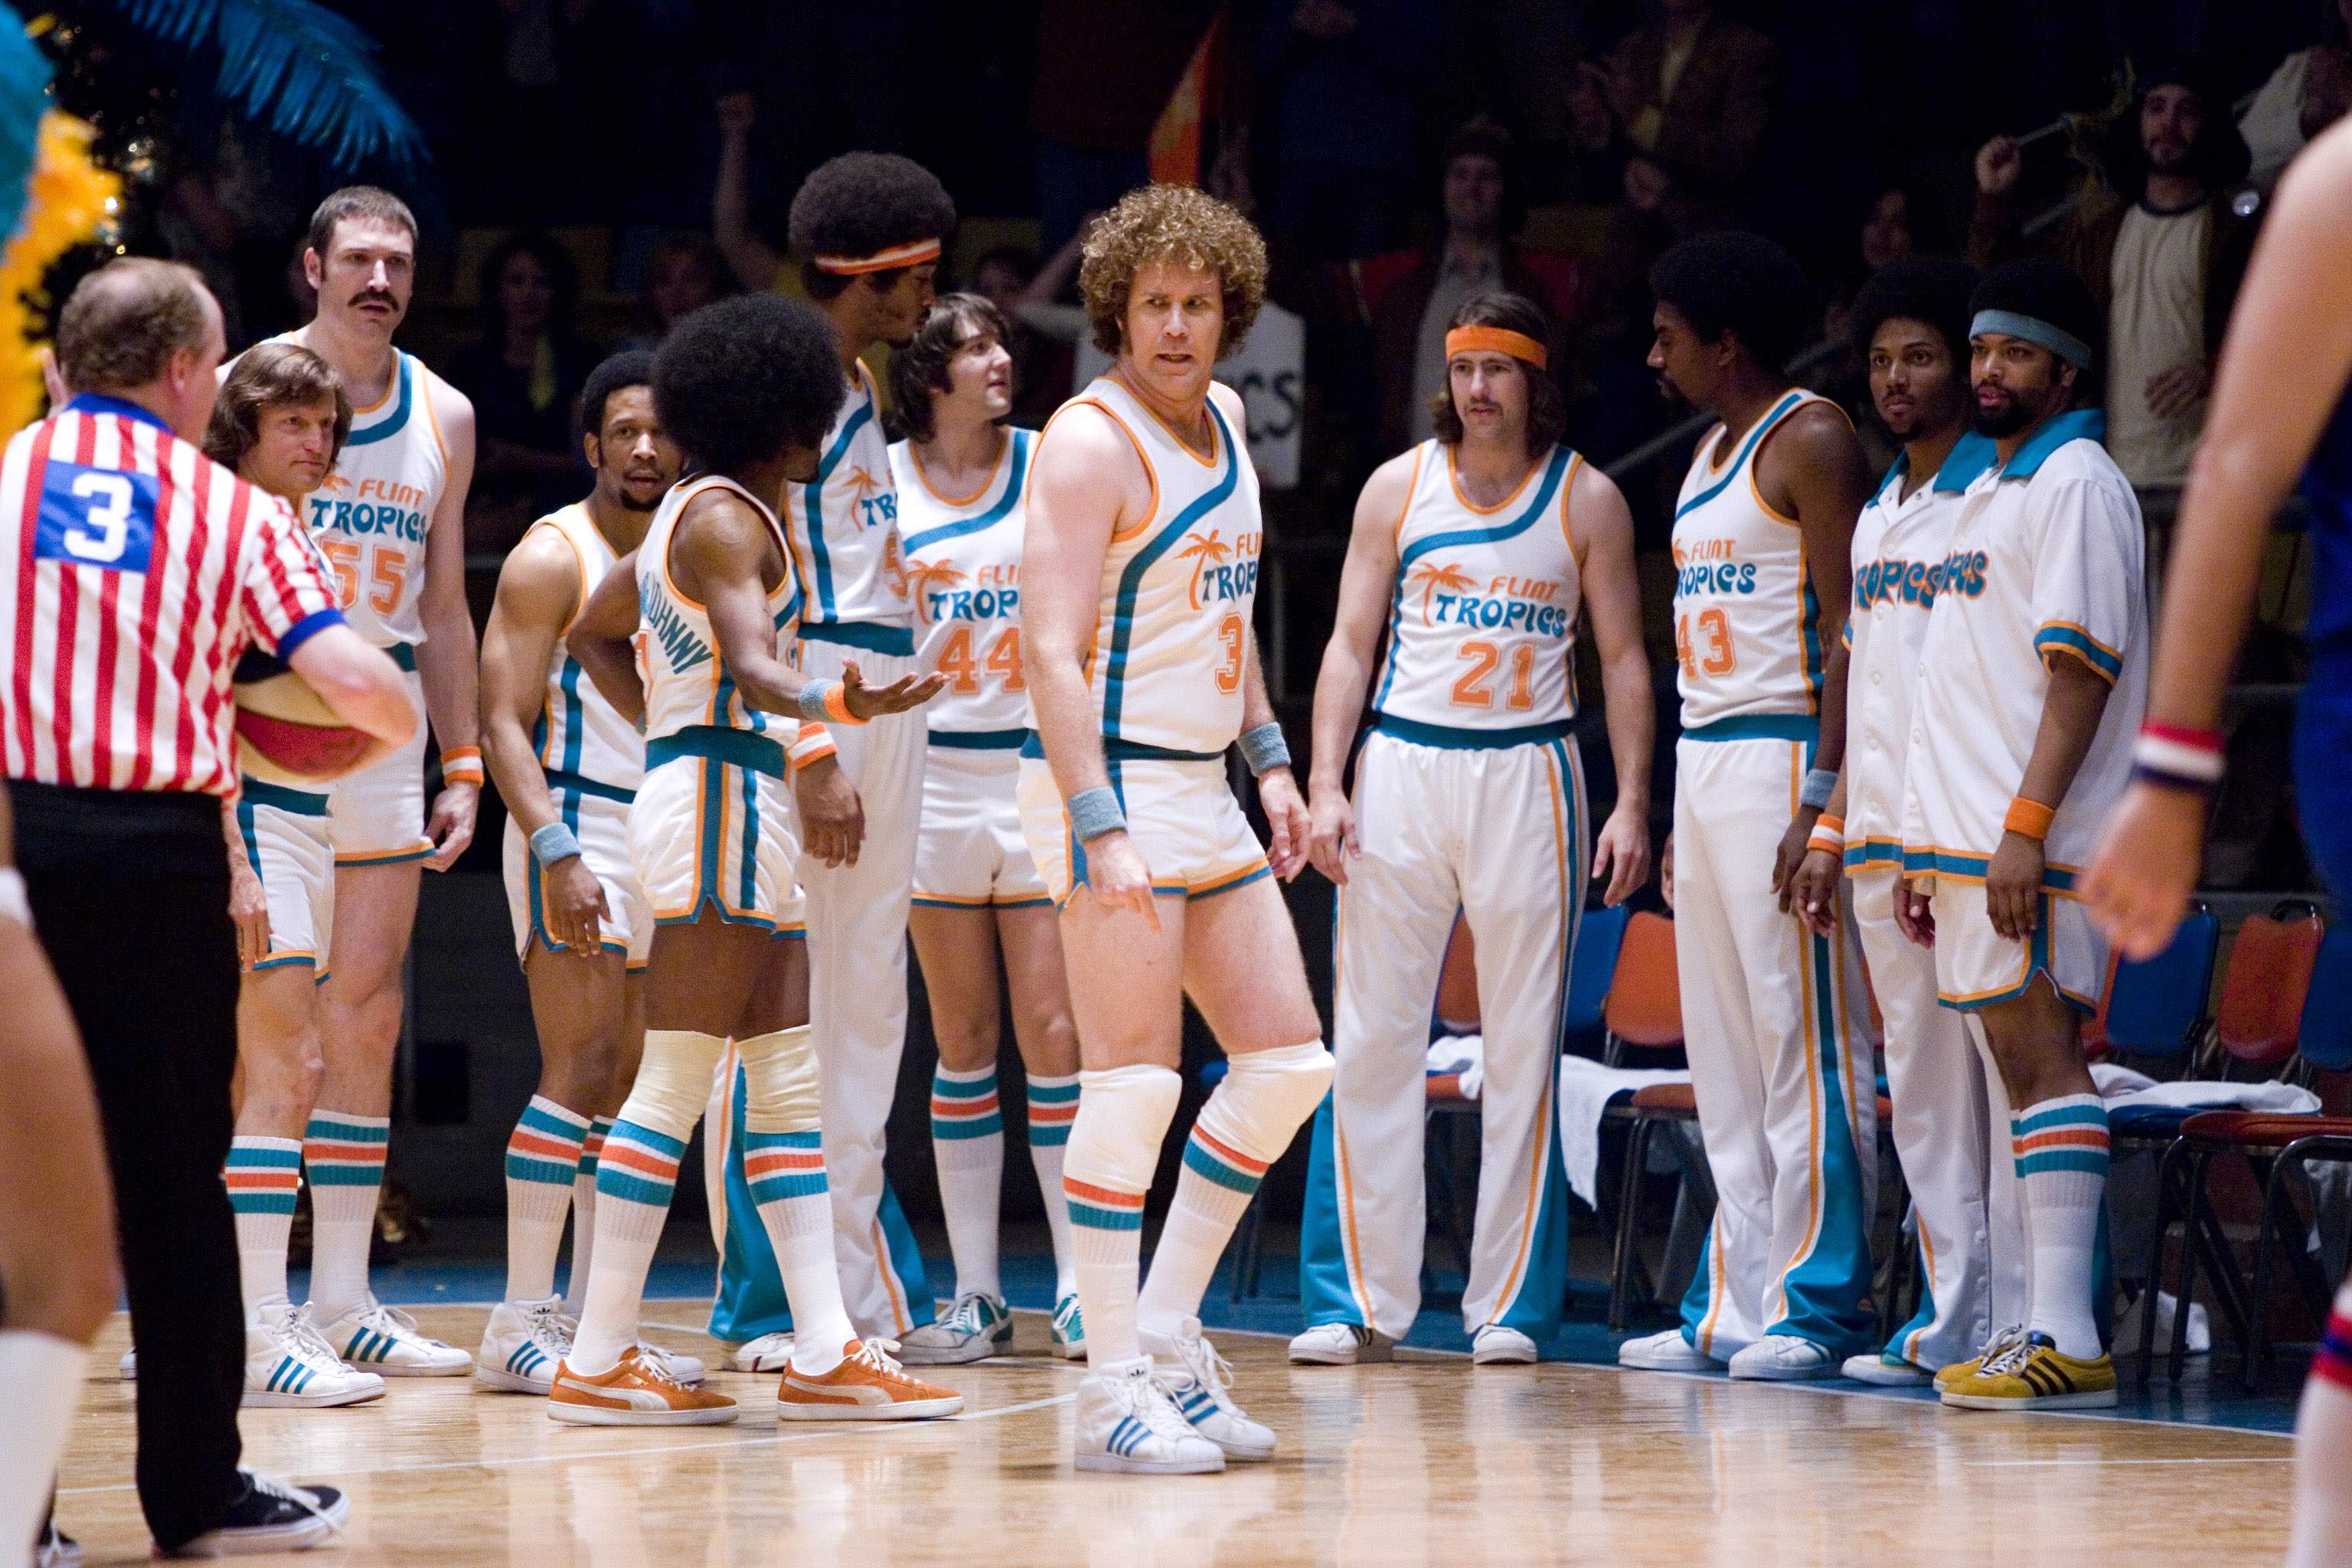 The legend of Jackie Moon and the Flint Tropics made its debut in the movie  Semi-Pro 12 years ago 🌴